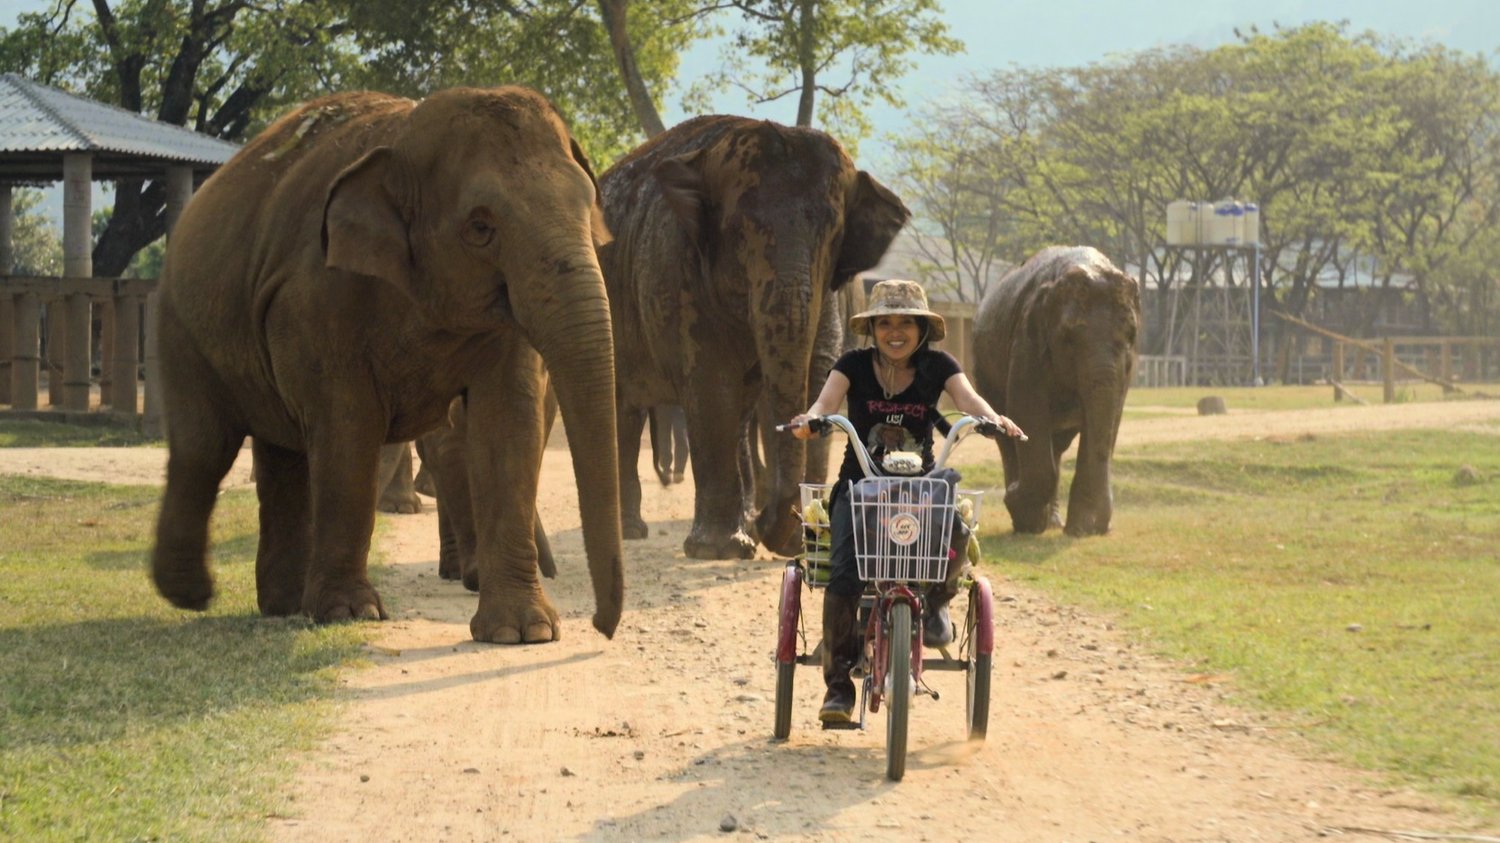 A woman rides a bicycle, followed by three elephants